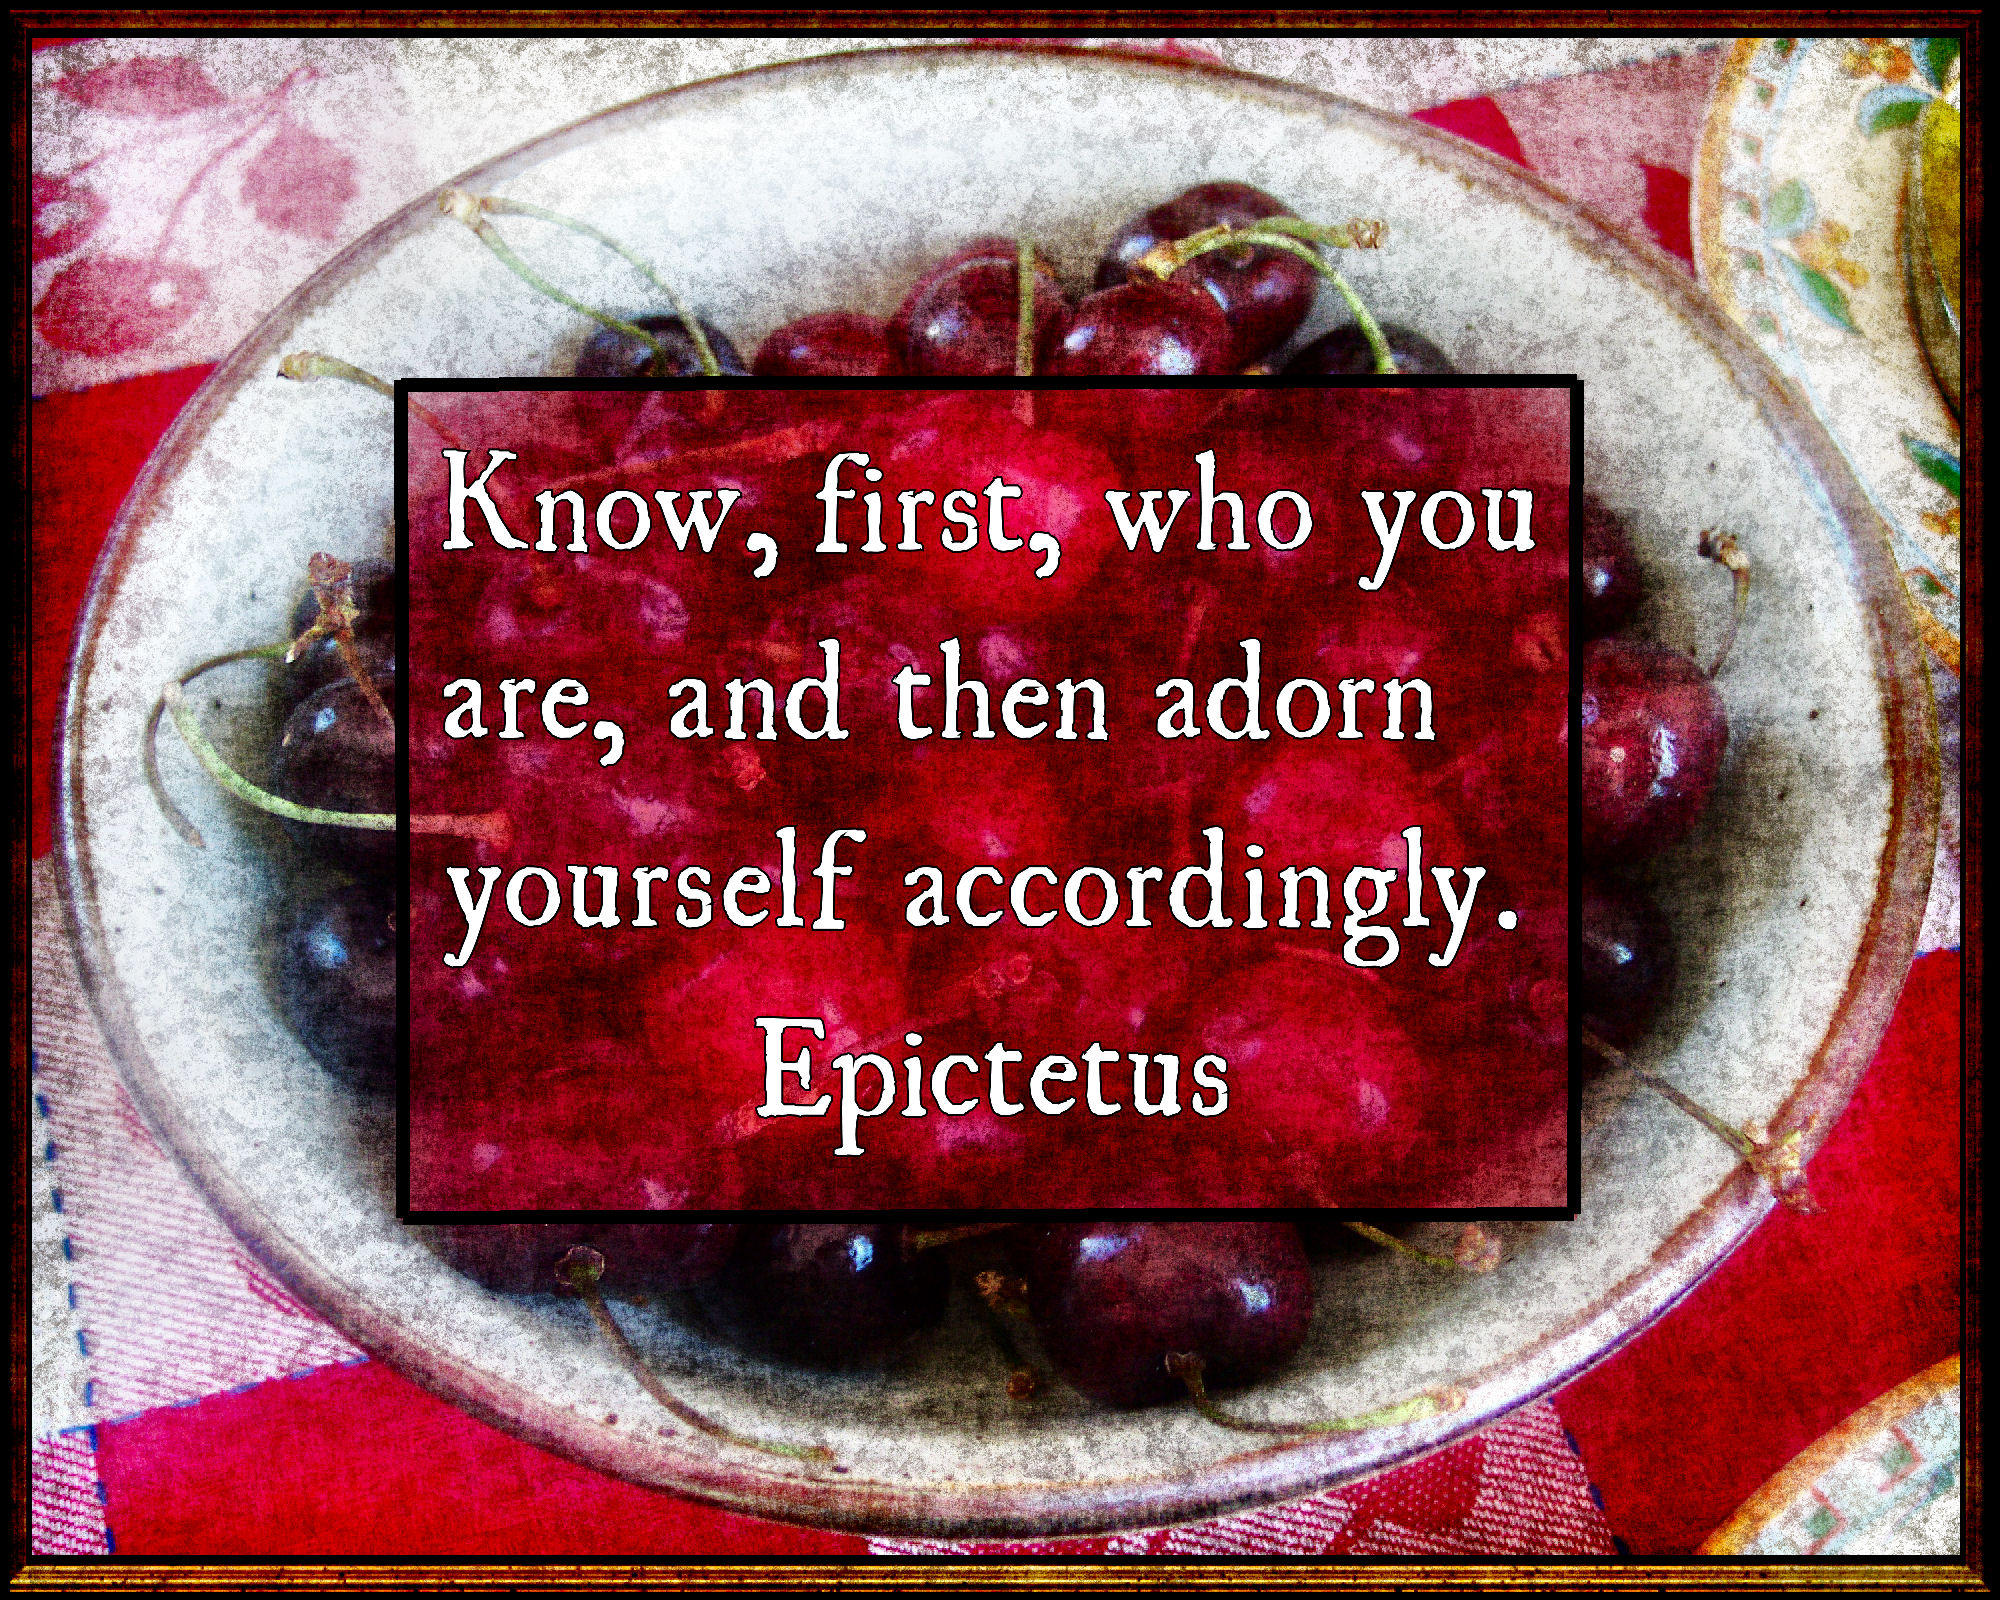 Quote by Epictetus, Know first who you are and then adorn yourself accordingly.